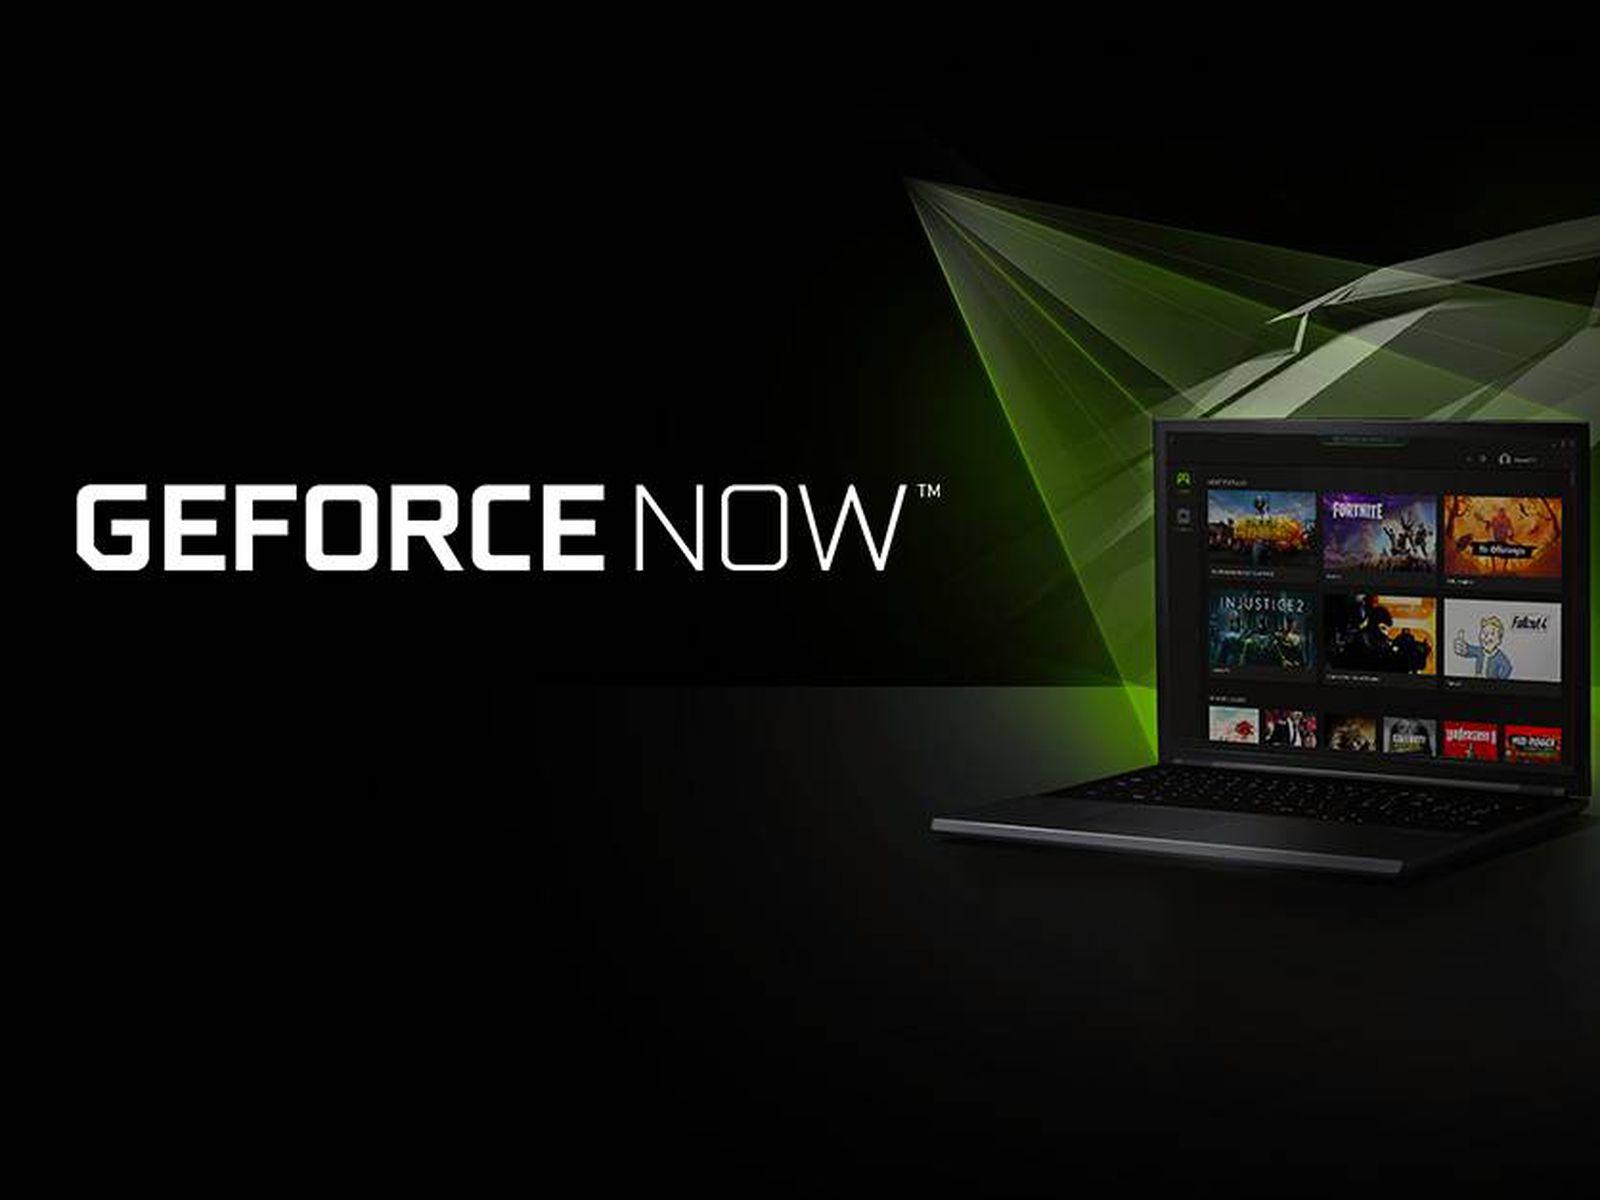 Is NVIDIA GeForce NOW the future of gaming on Mac & iOS? [Video] - 9to5Mac